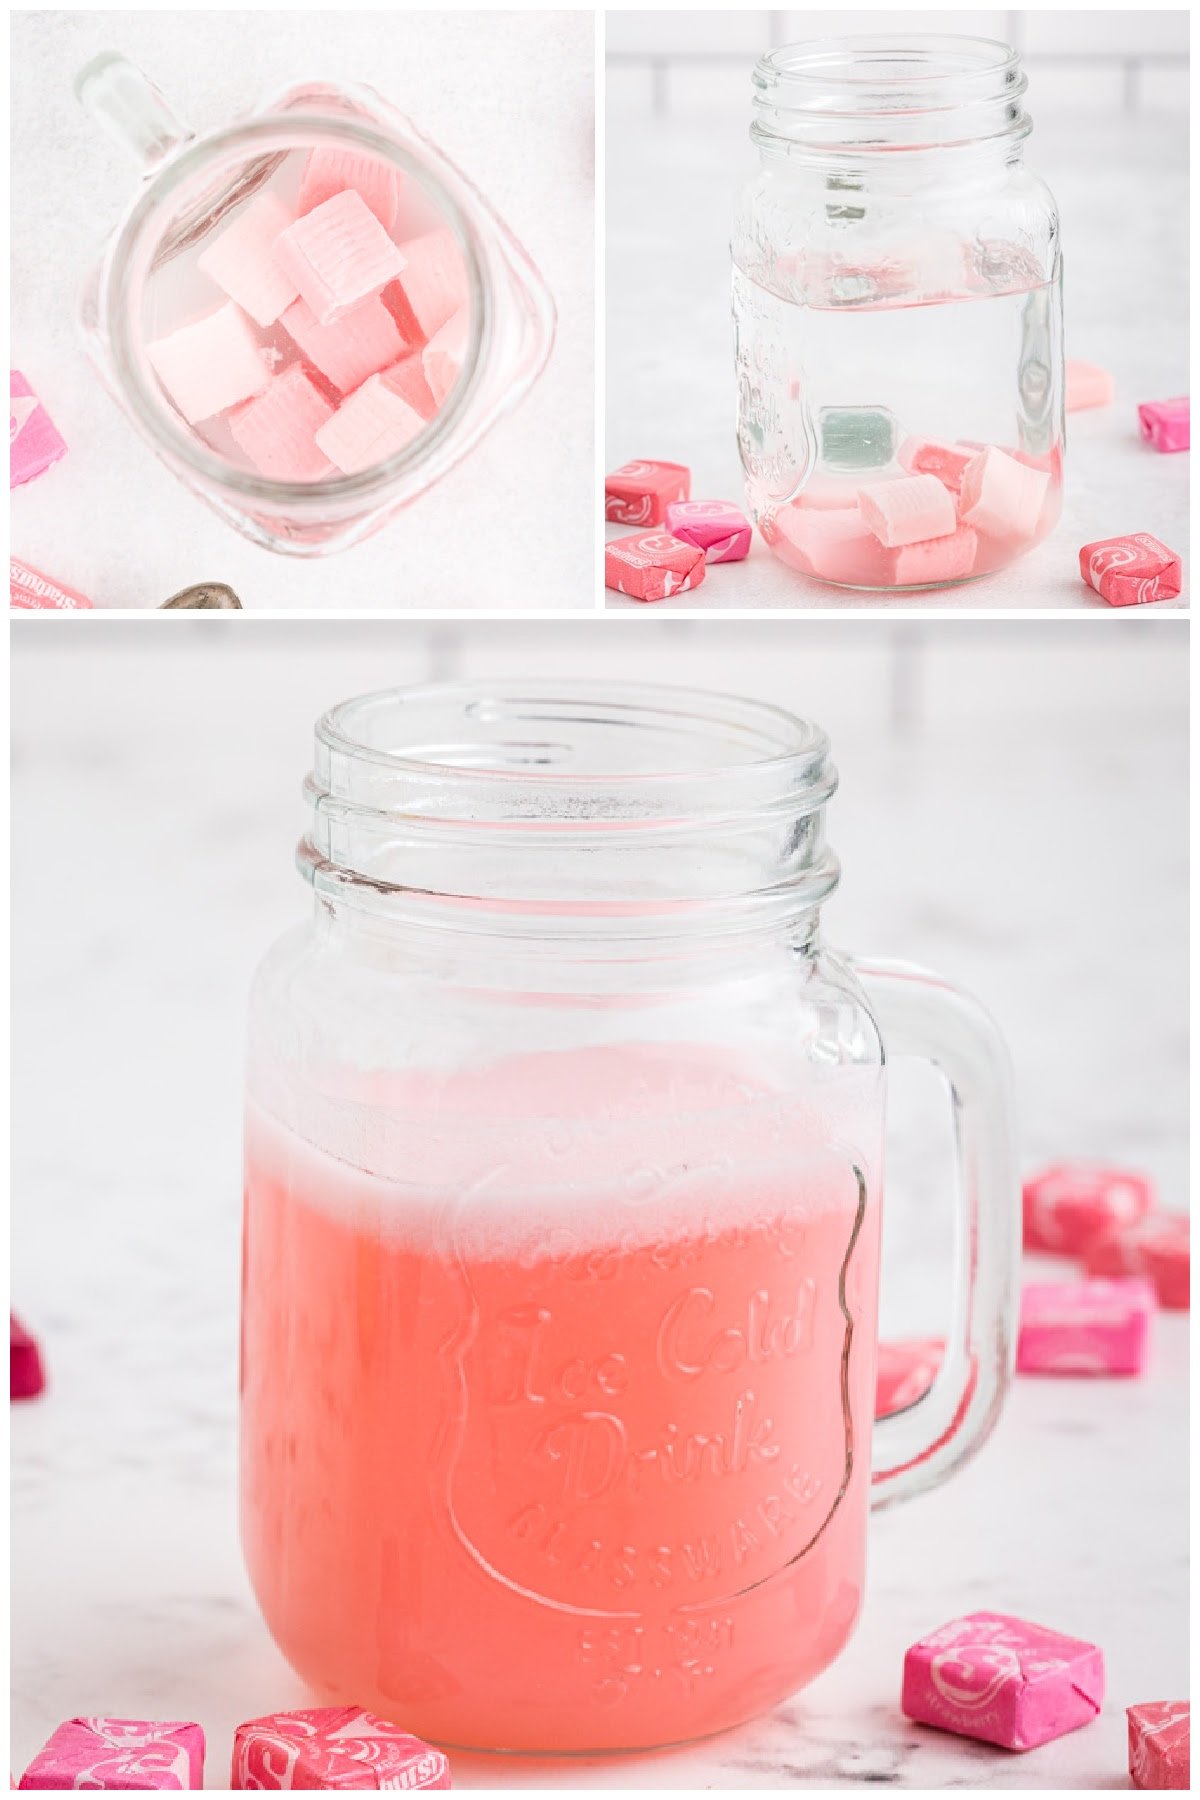 Photo collage of pink Starburst candies added to a mason jar with liquid and then dissolved to make a pink liquid.